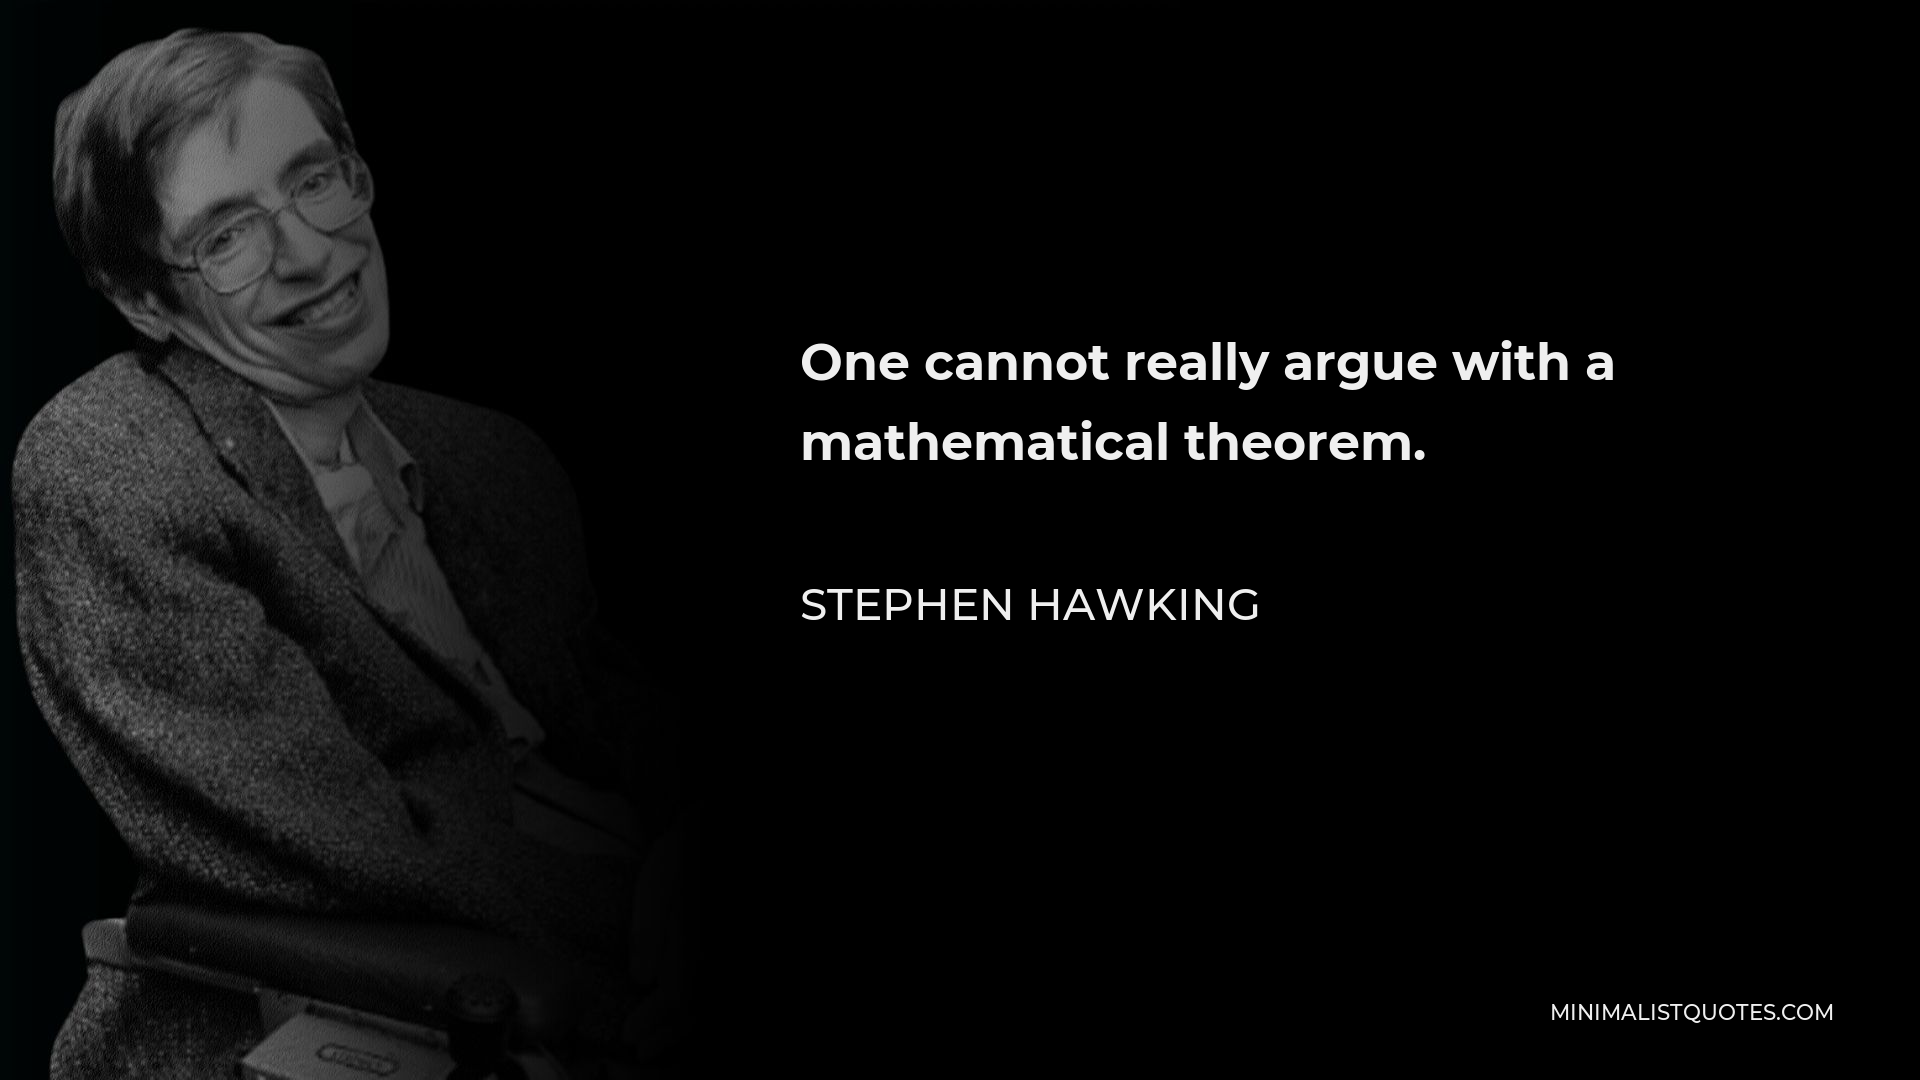 Stephen Hawking Quote - One cannot really argue with a mathematical theorem.